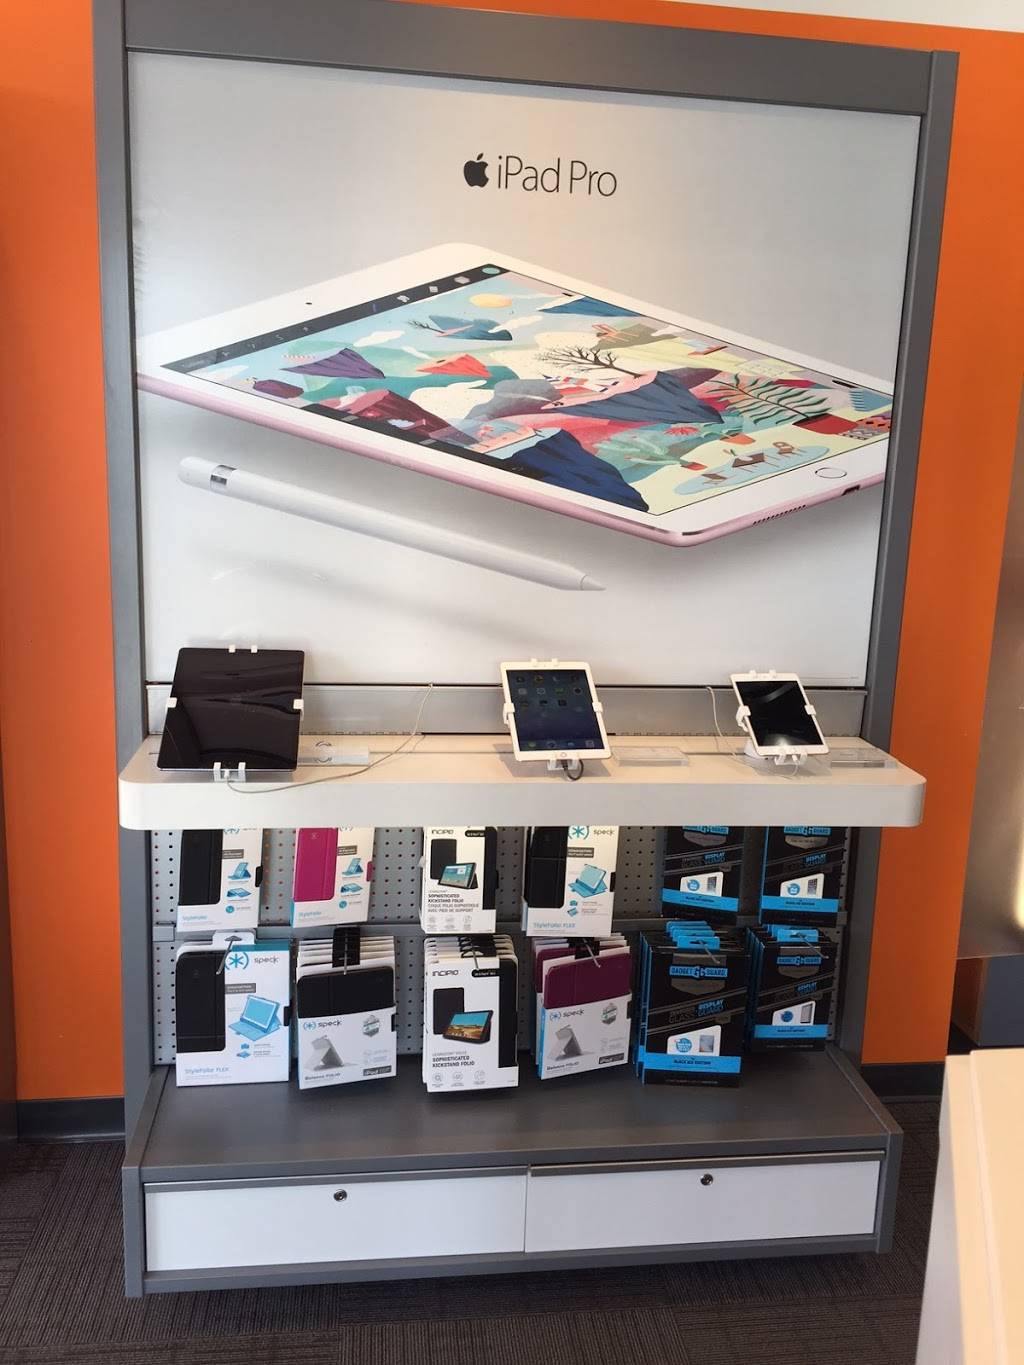 AT&T Store | 8052 Limonite Ave Ste 101, Riverside, CA 92509, USA | Phone: (951) 360-2142